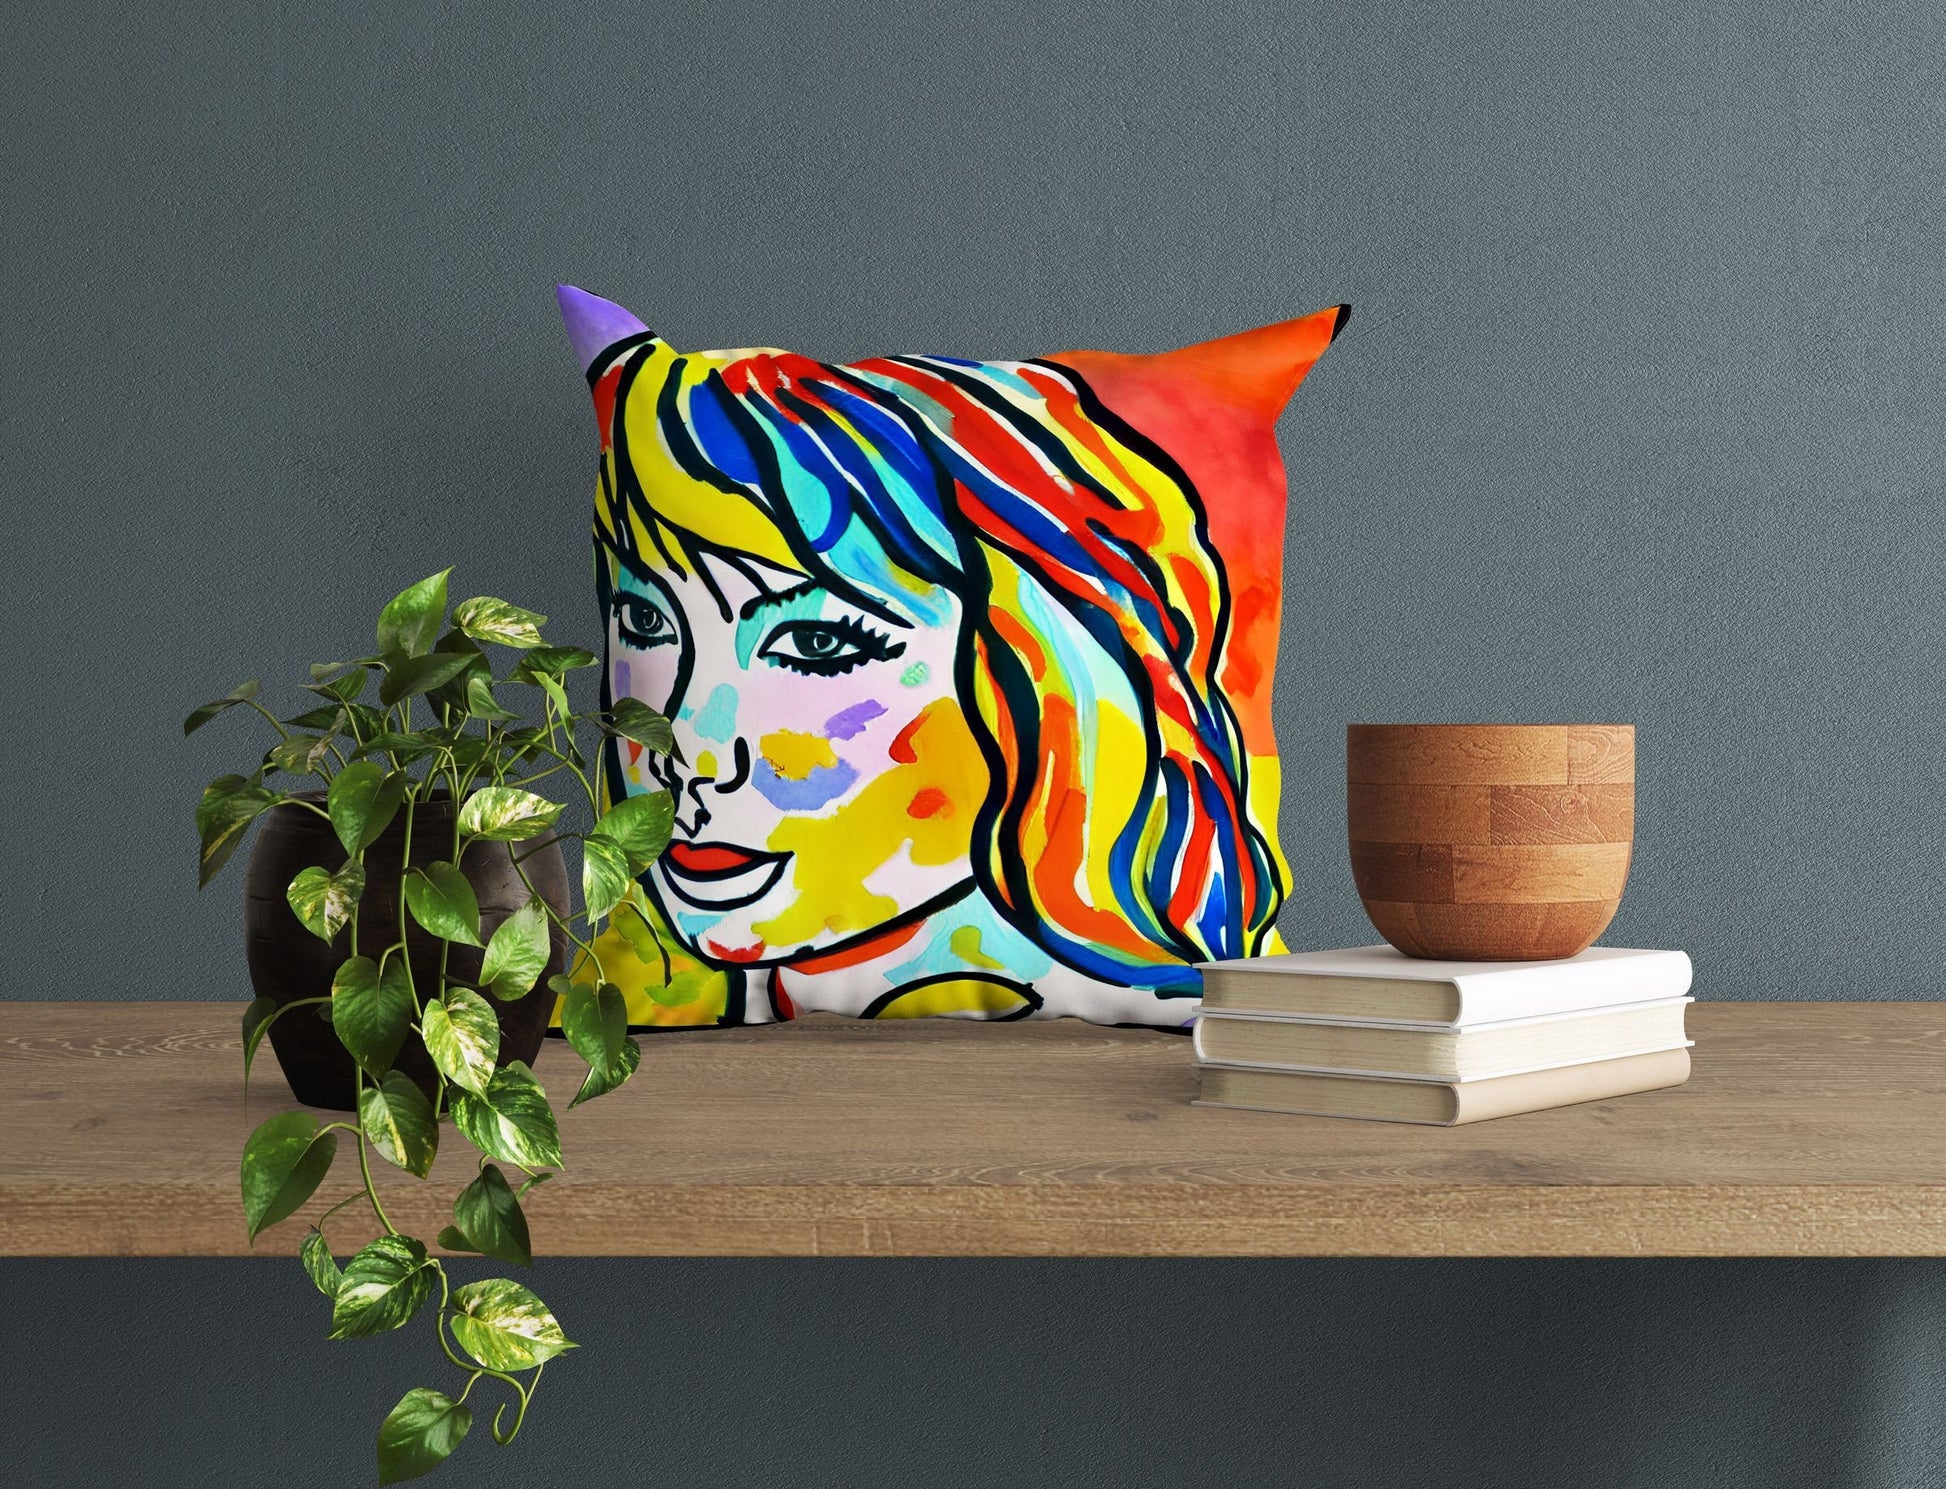 Taylor Swift Throw Pillow Cover, Abstract Throw Pillow Cover, Art Pillow, Colorful Pillow Case, Contemporary Pillow, Square Pillow